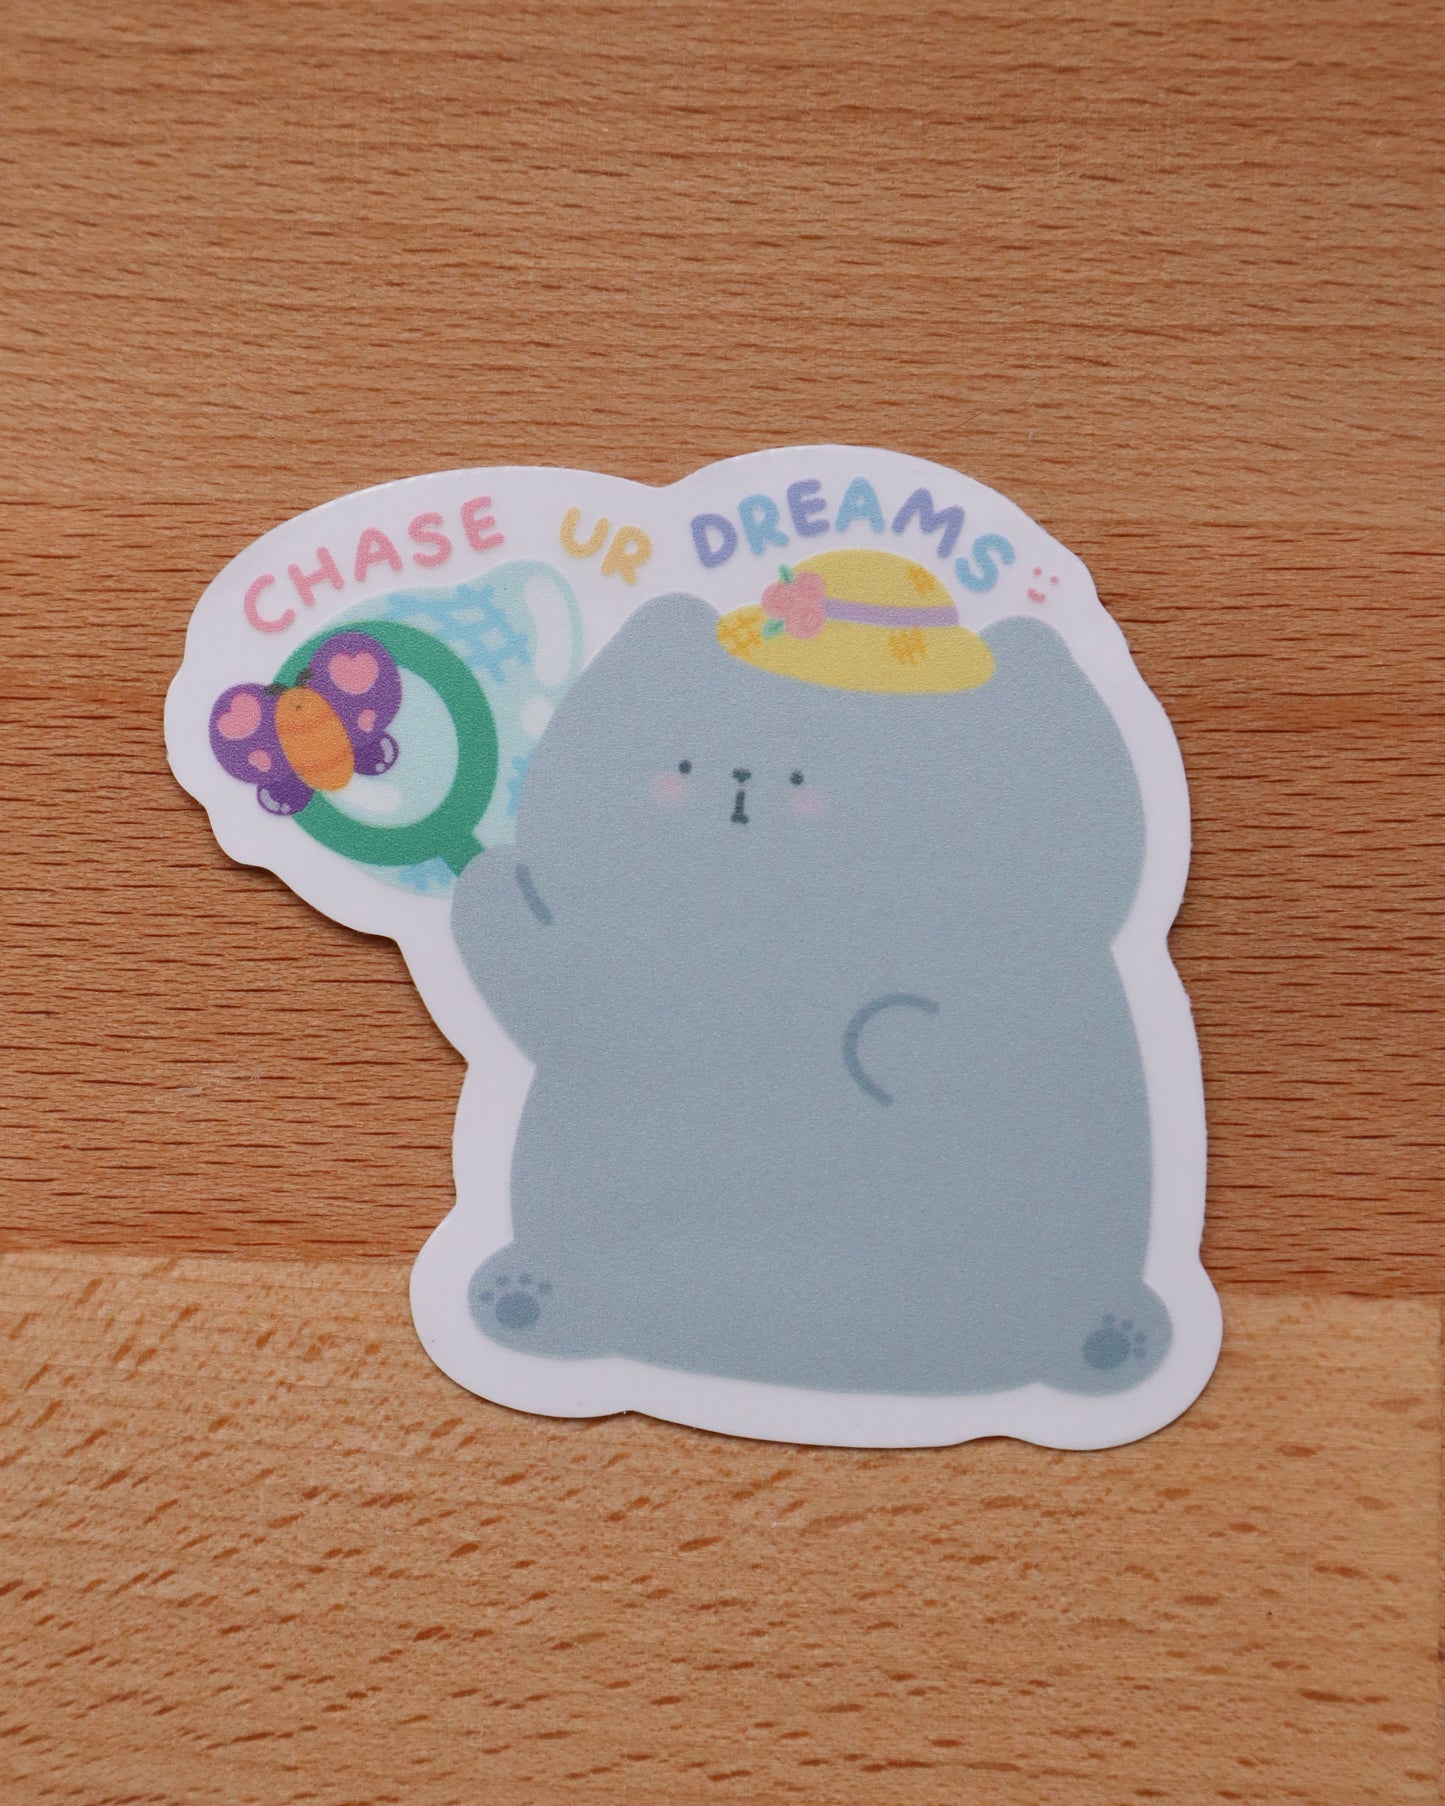 Pippin Chase Your Dreams Die-Cut Sticker